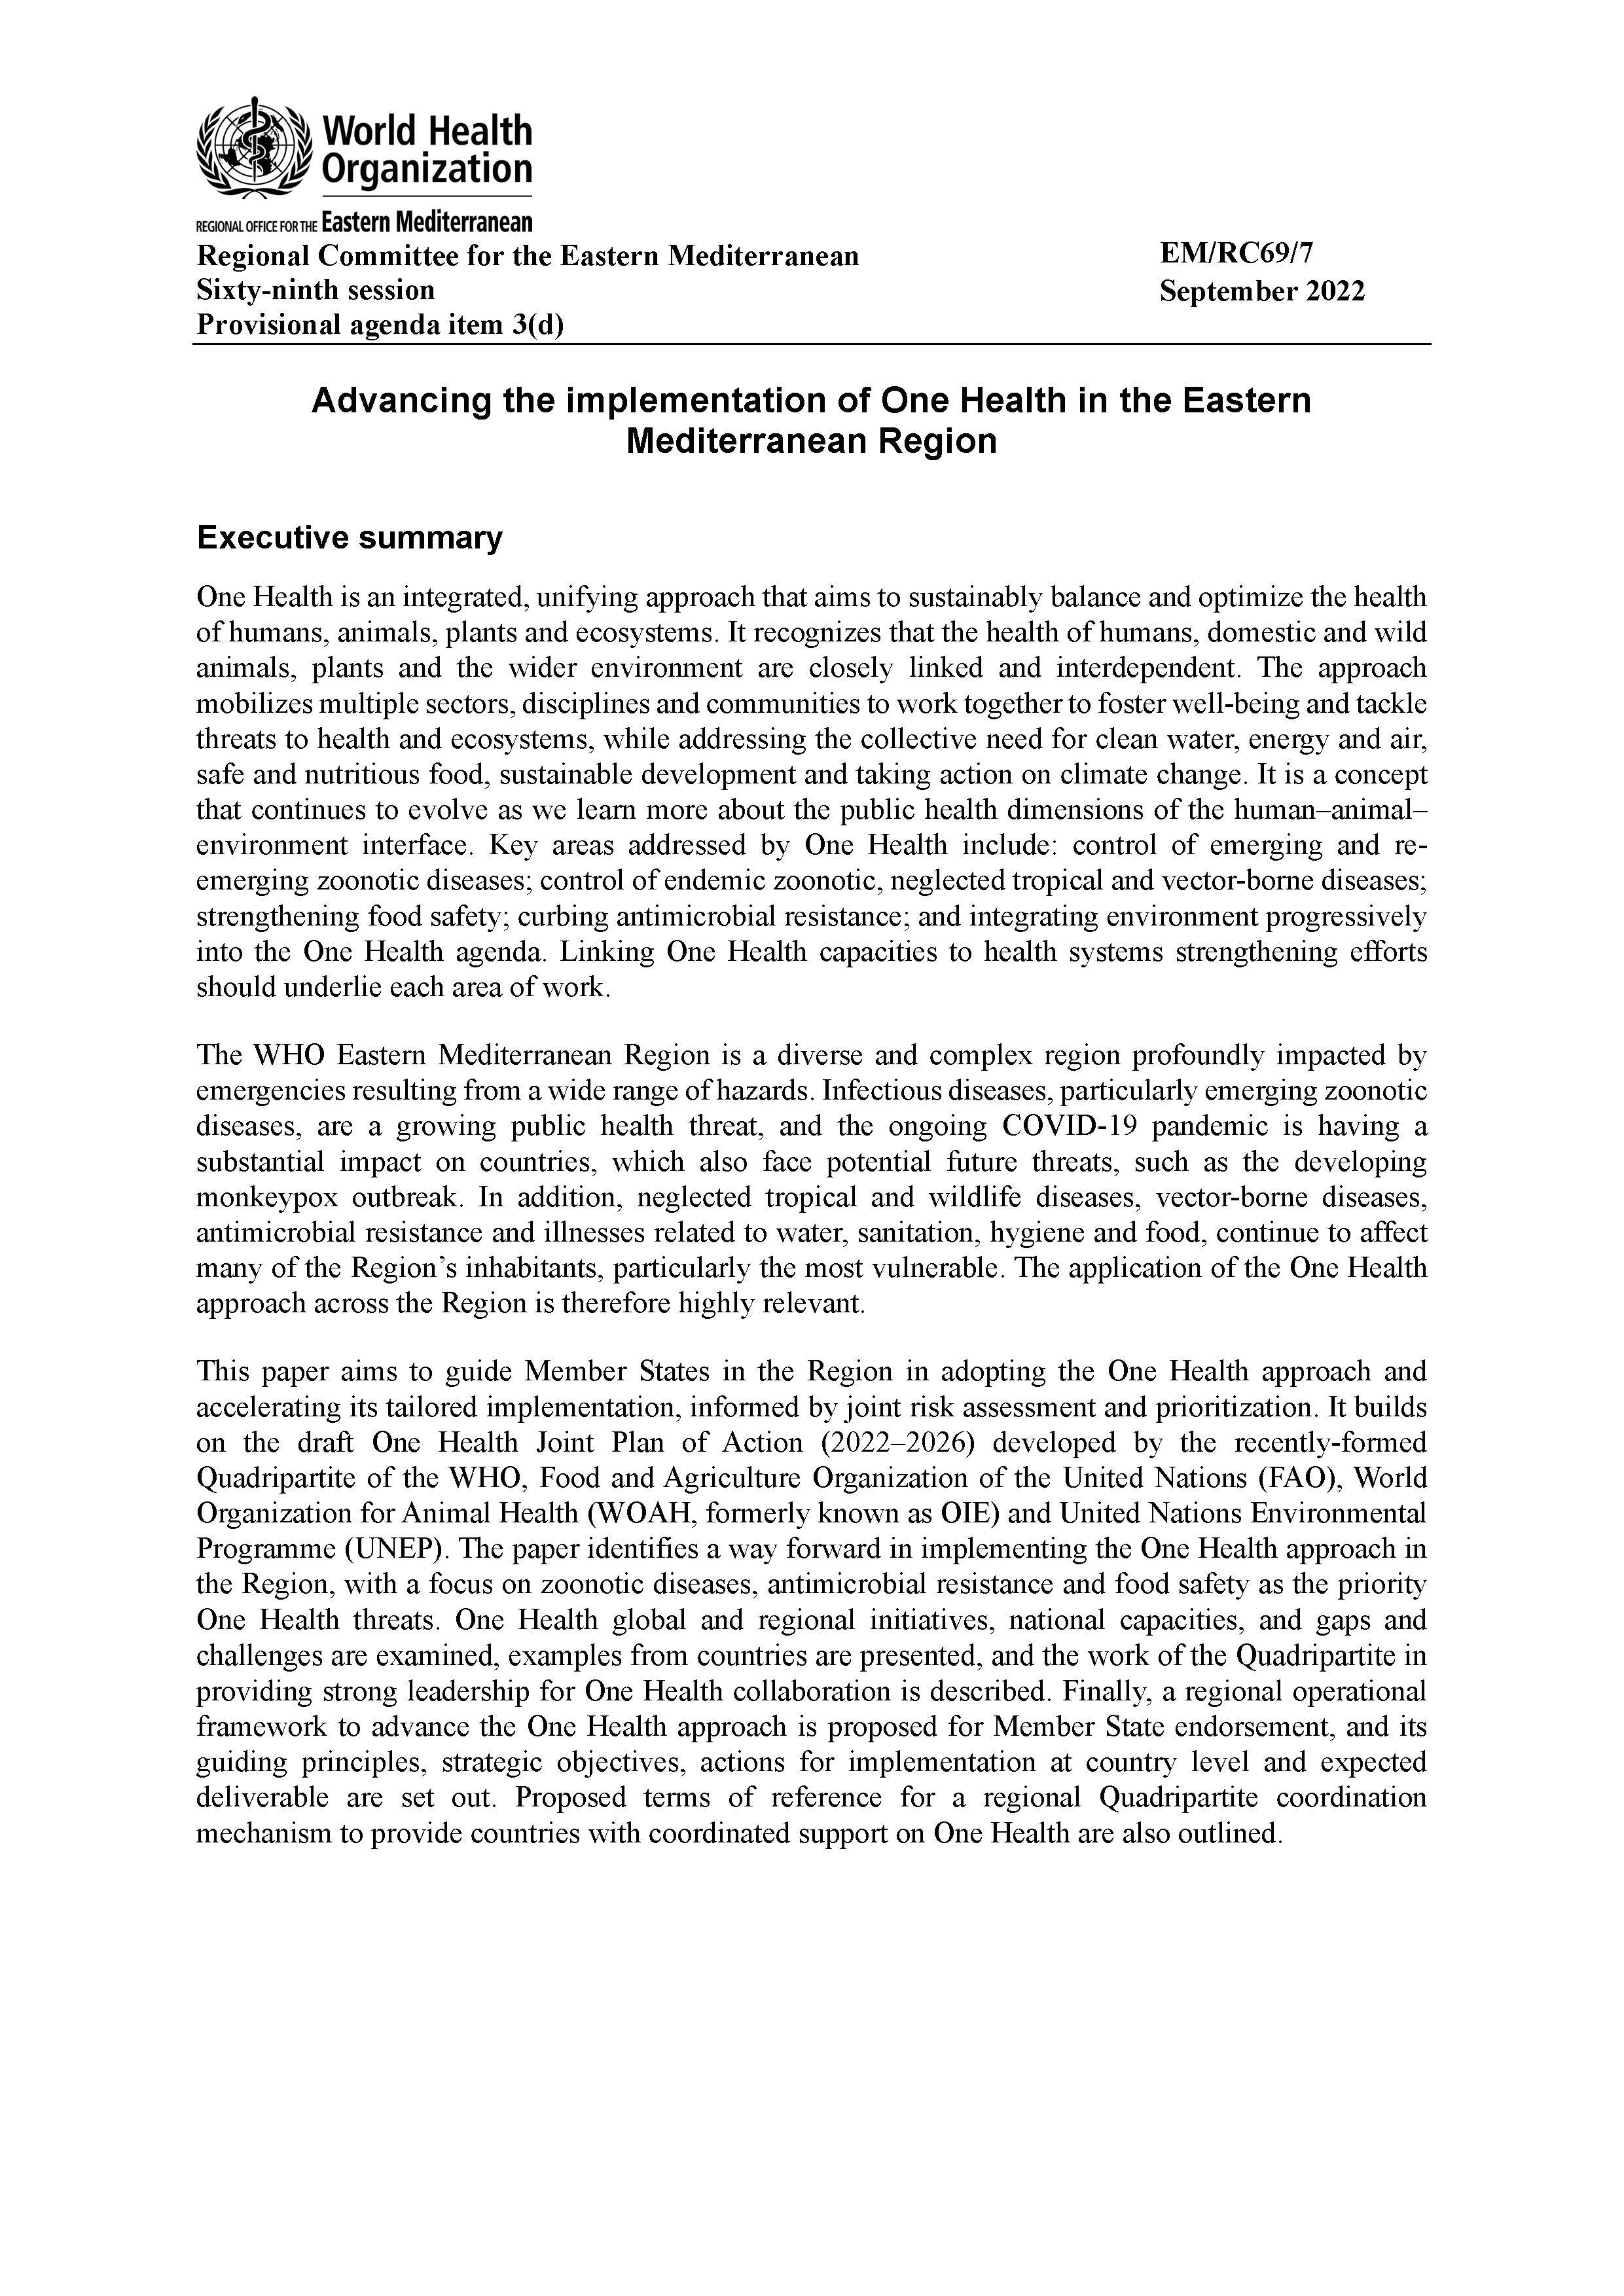 advancing_the_implementation_of_one_health_in_the_emr